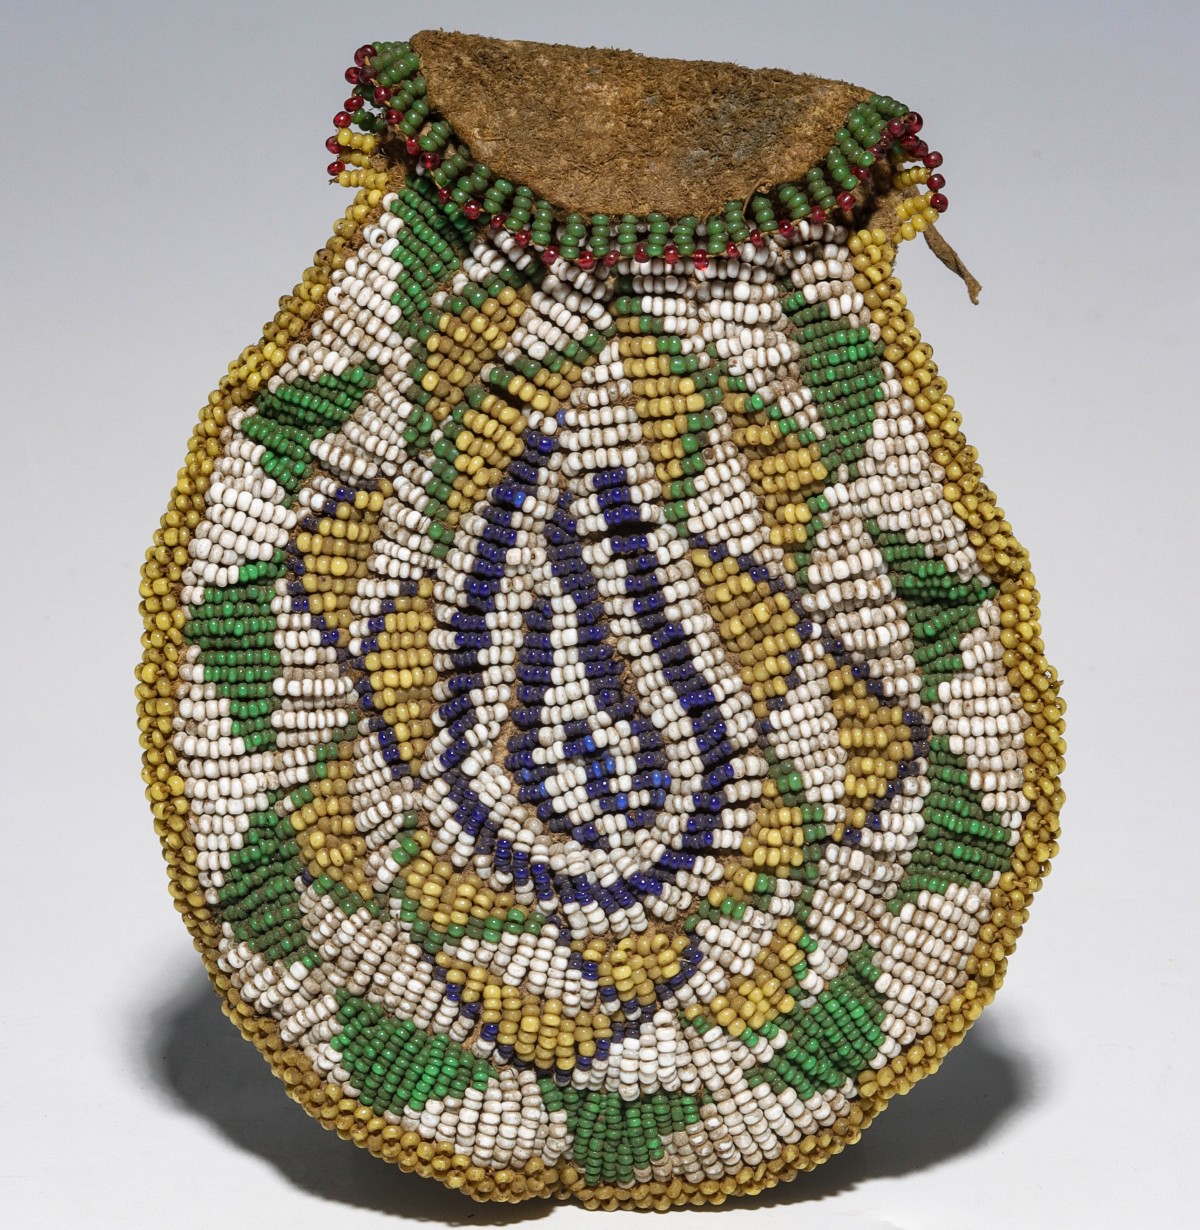 A BEADED HIDE POUCH, POSSIBLY UTE, CIRCA 1900